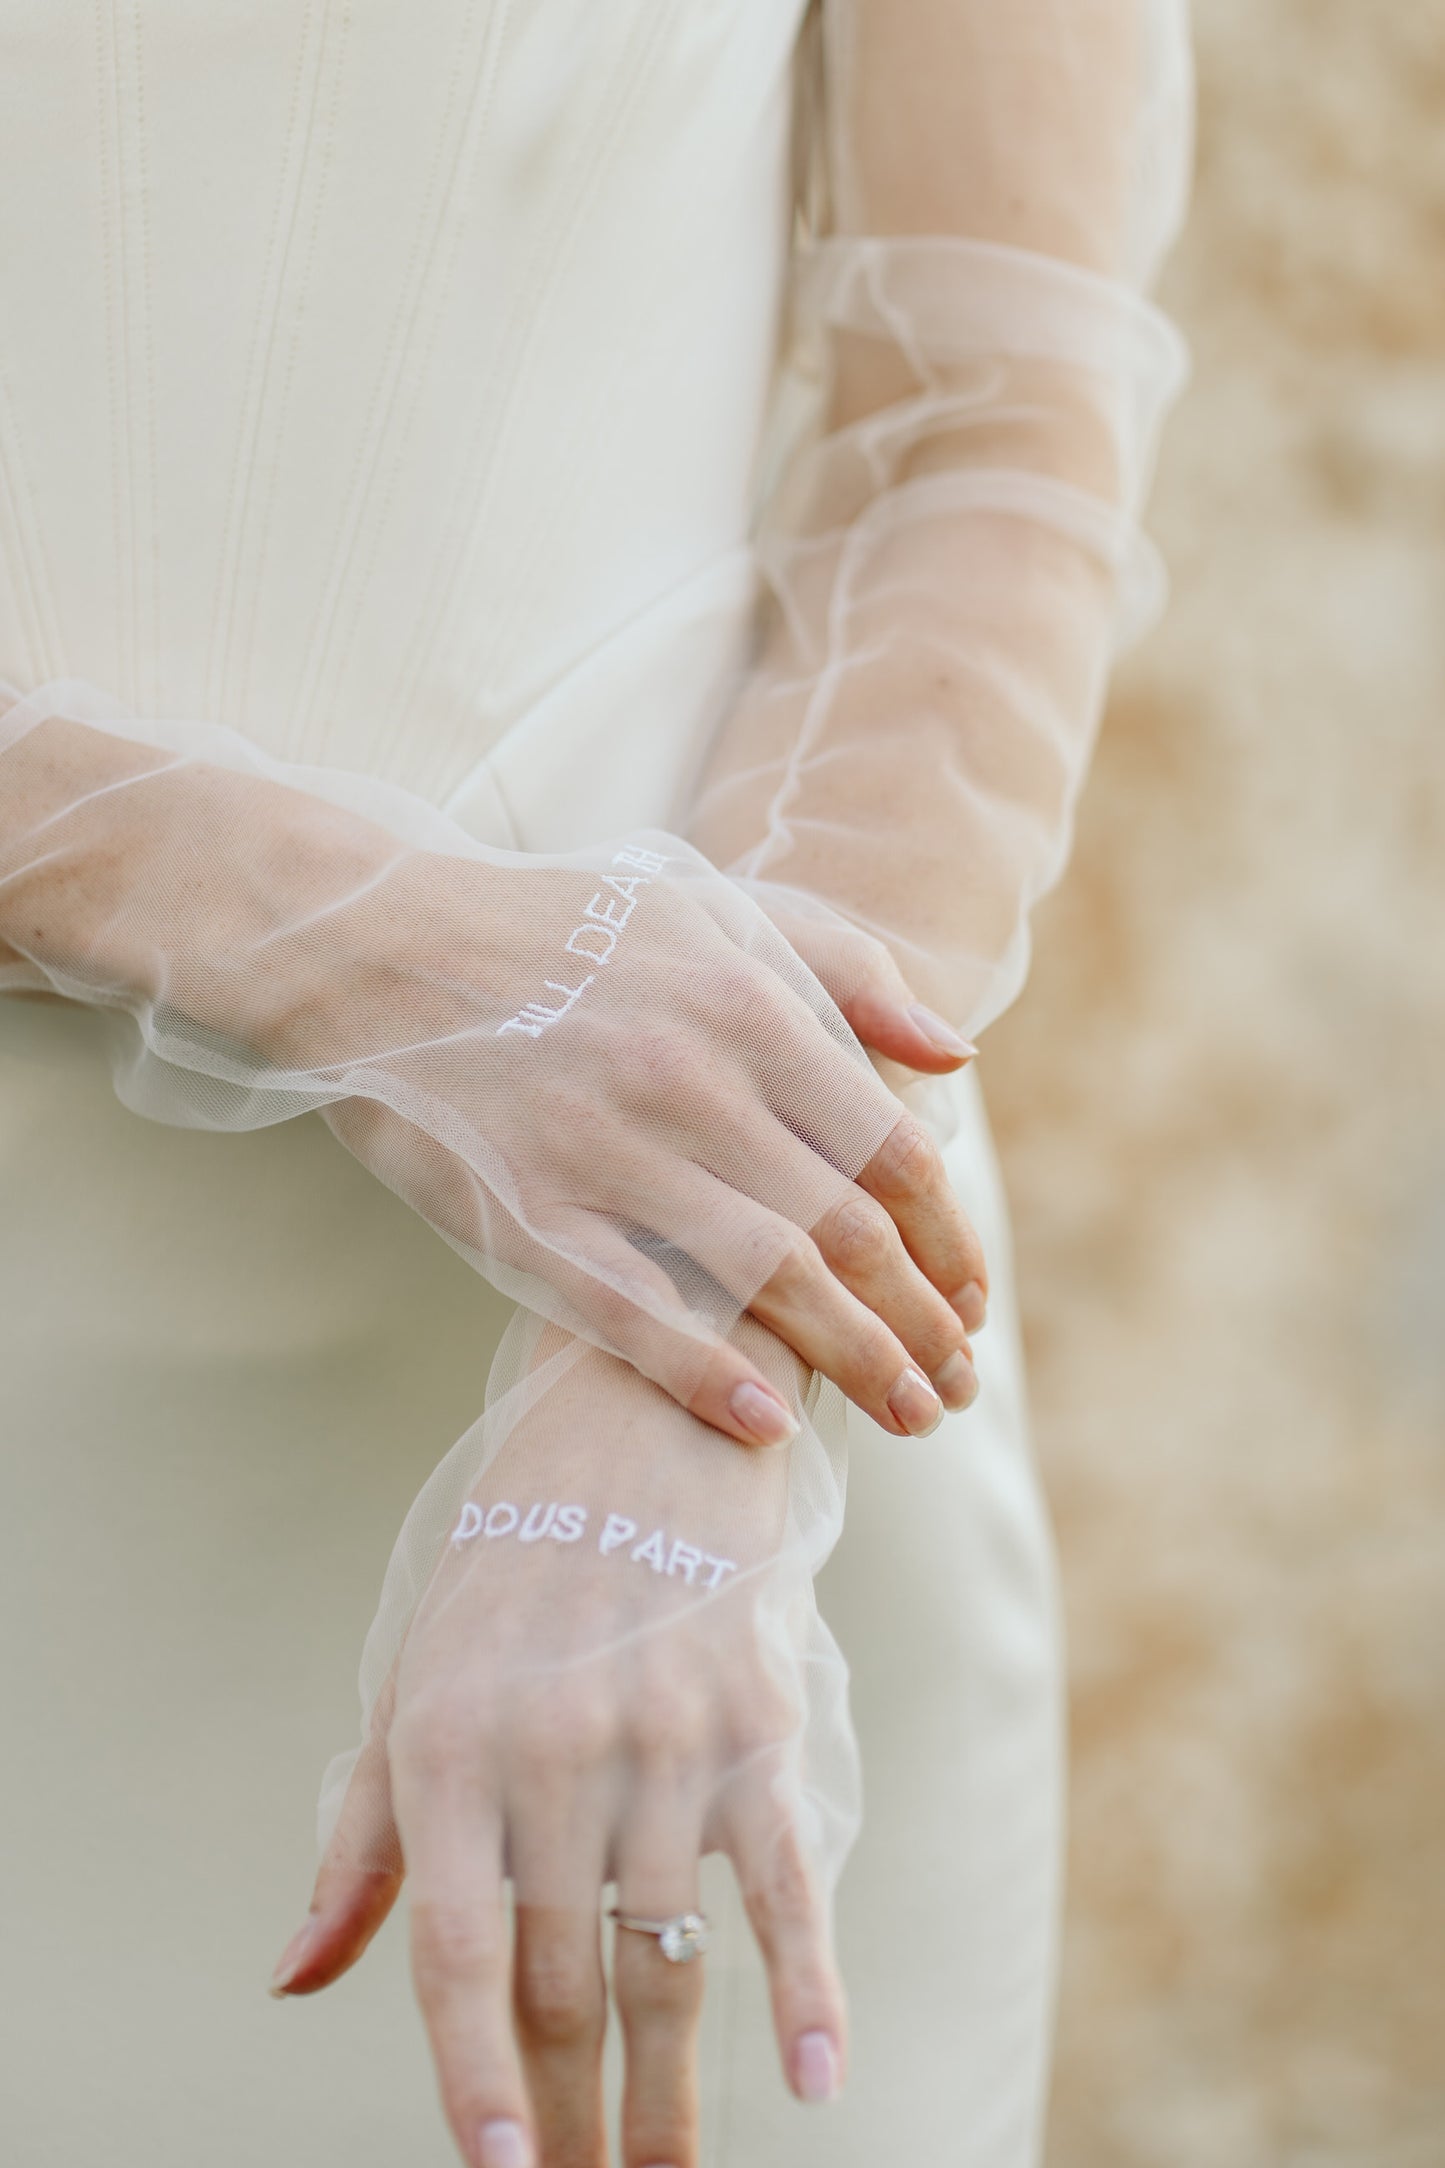 sheer white bridal glove sleeves set on bride wearing corset gown